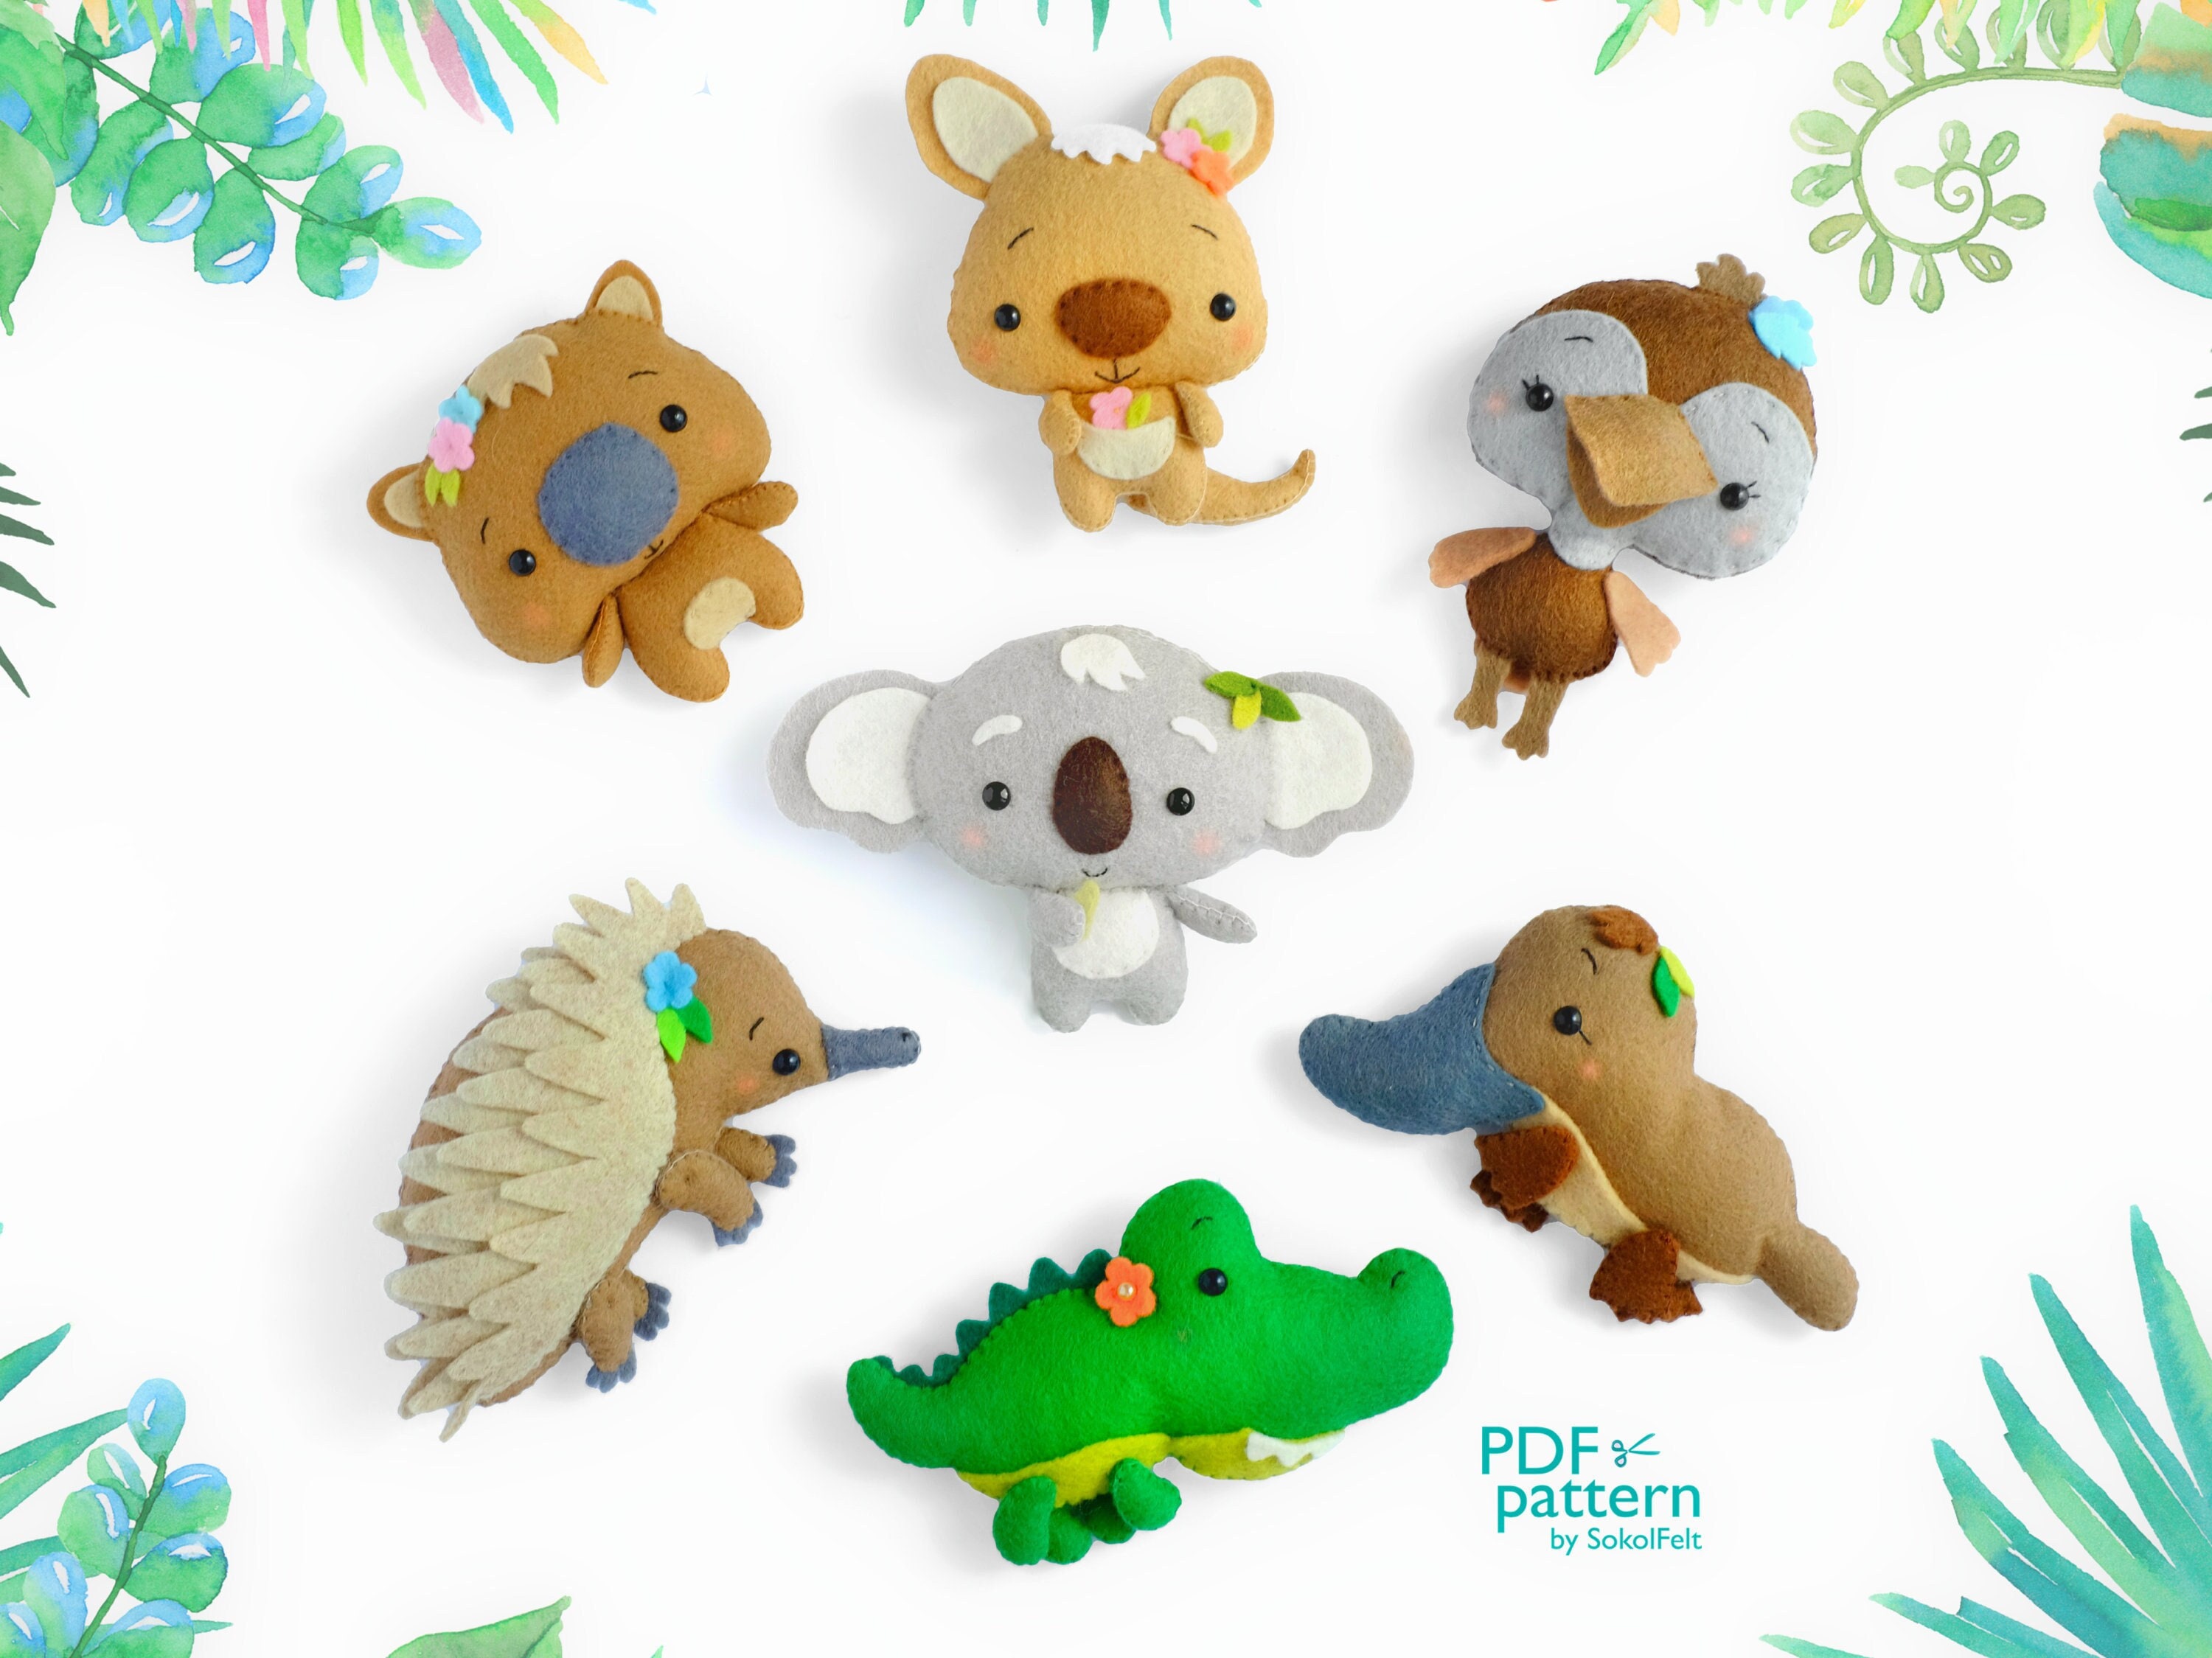 20 Piece Woodland Creatures Felt Plush Animals Sewing Patterns PDF, SVG  Download, Perfect for Baby Gift Mobile or Woodland Nursery Decor 